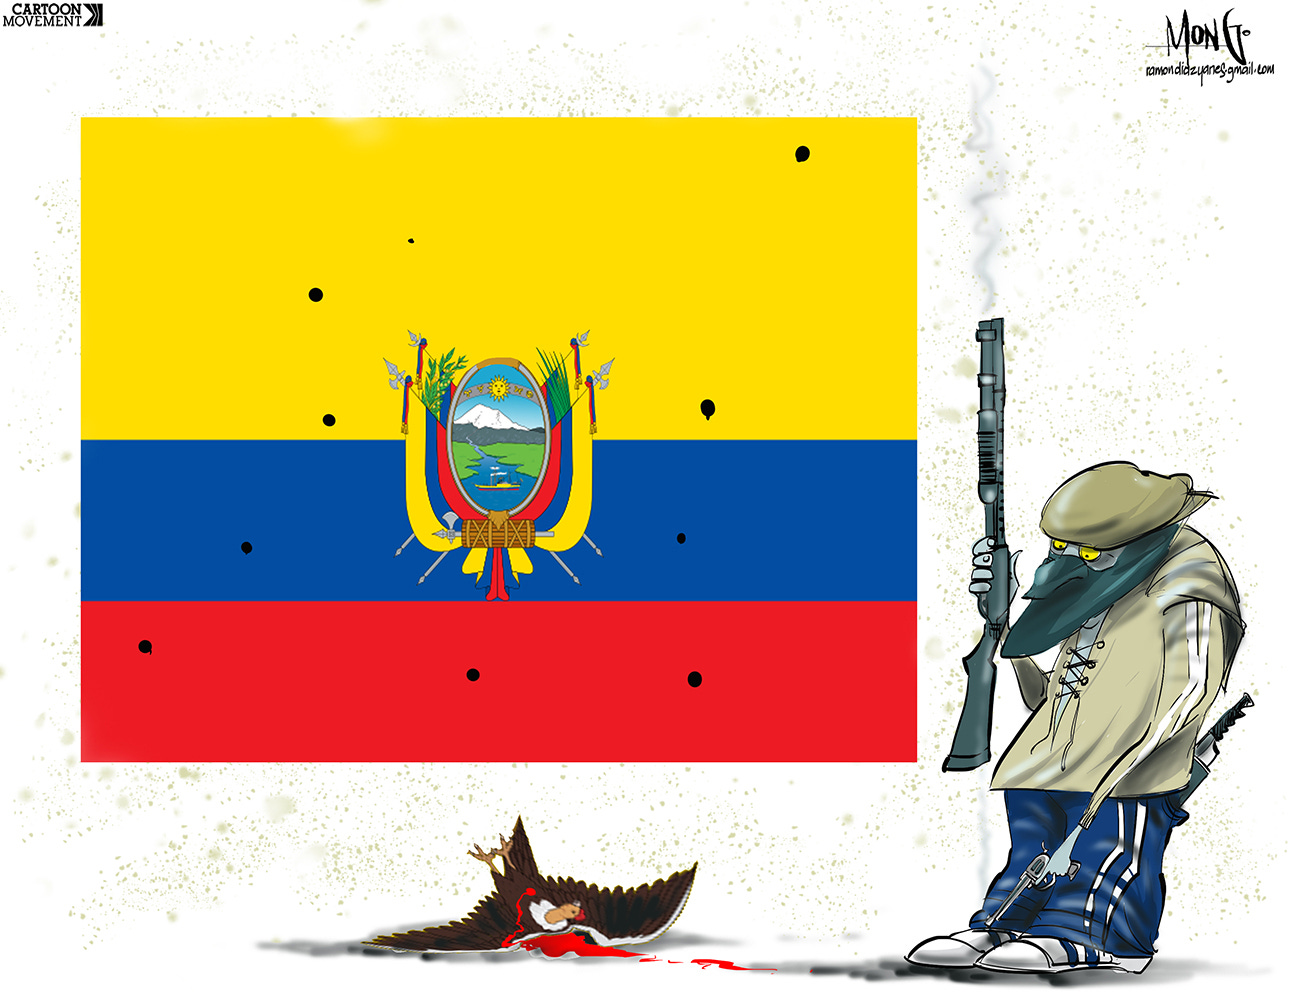 Cartoon showing the flag of Ecuador. The bird (condor) that normally is perched on top the the coat of arms in the middle of the flag is shot down, lying bleeding on the ground, by a criminal gang member standing next to the flag with a smoking gun in his had.